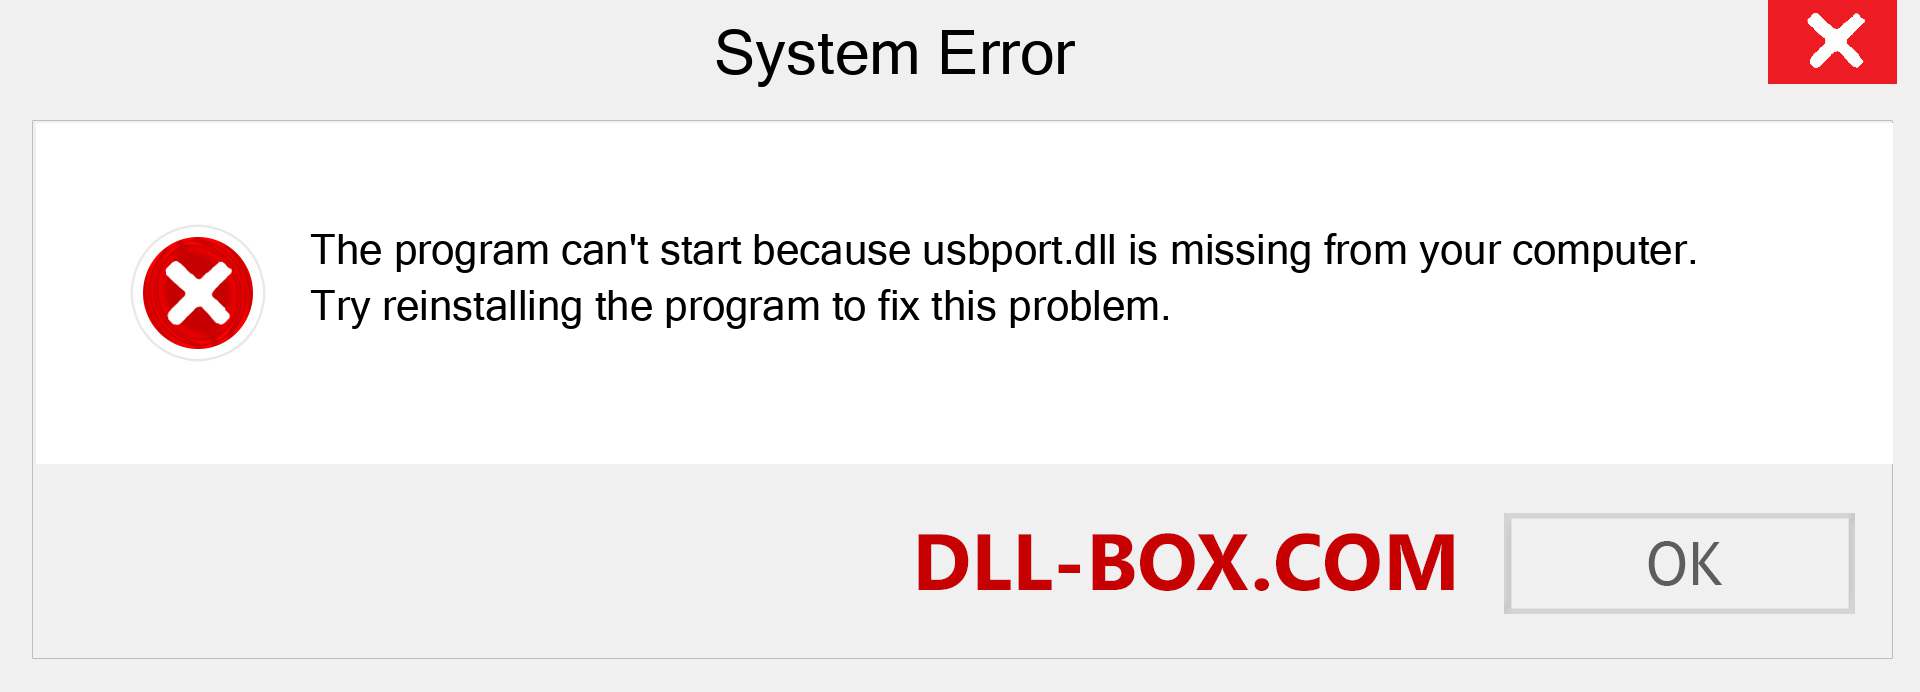  usbport.dll file is missing?. Download for Windows 7, 8, 10 - Fix  usbport dll Missing Error on Windows, photos, images